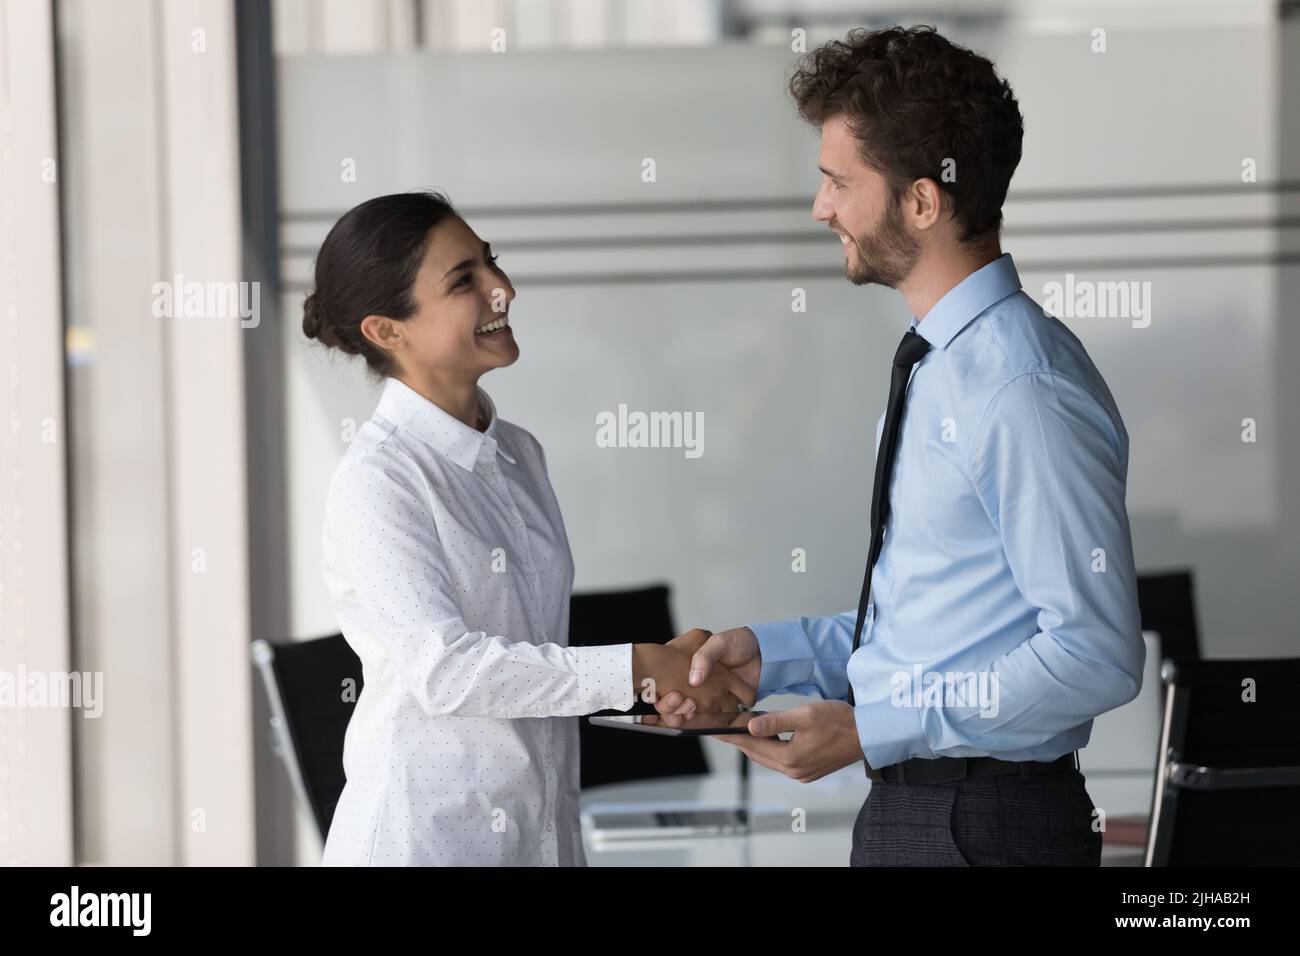 Two happy confident diverse business people shaking hands in office Stock Photo